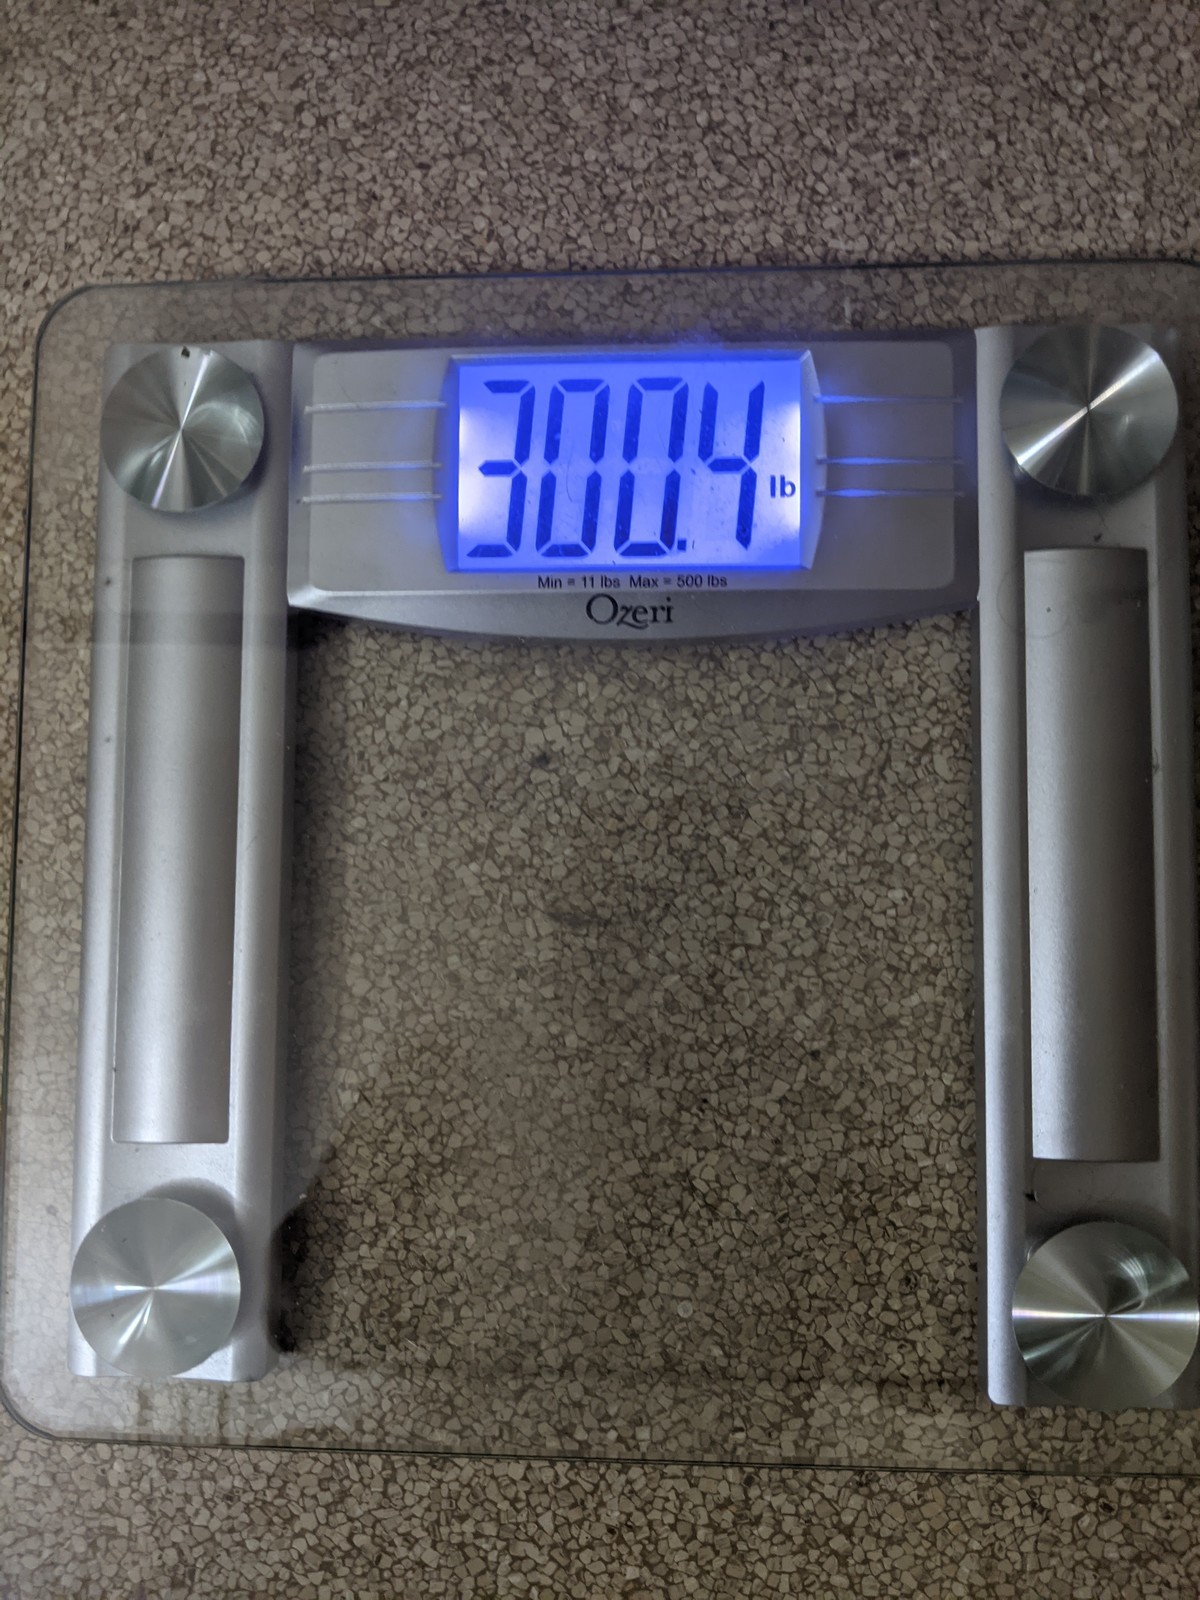 November 2020 weight log. join list: WeightlossProgress (169 subs)Mention Clicks: 1097Msgs Sent: 2943Mention History It's been a loooong year for us all, hasn't